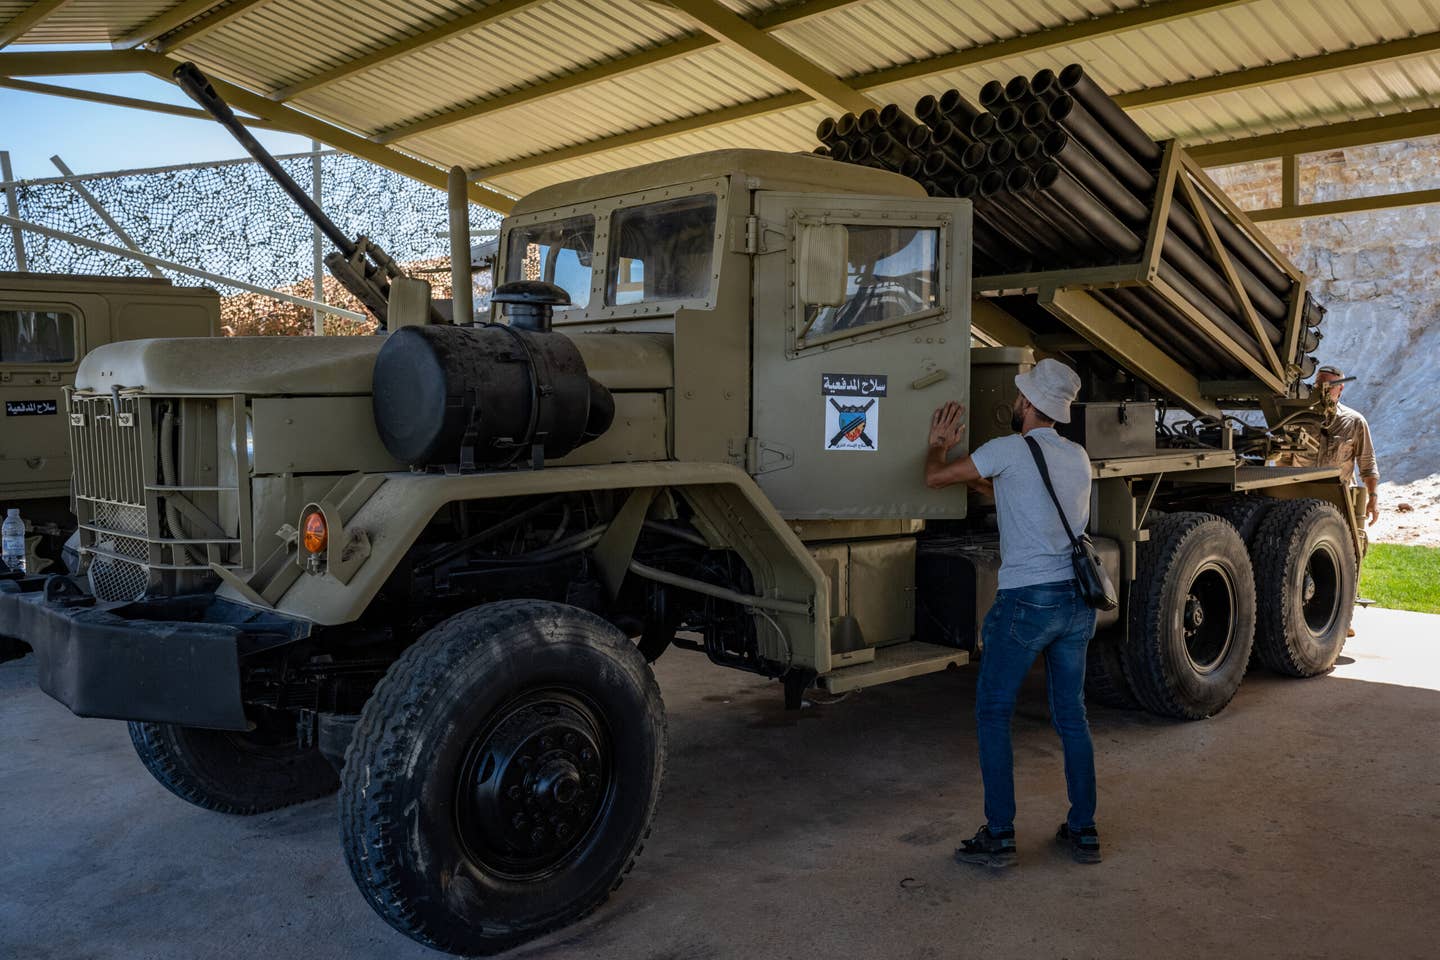 A Grad-type multiple rocket launcher at the Baalbek Tourist Museum in the Bekaa Valley town of Baalbek, Lebanon. <em>Photo by Scott Peterson/Getty Images</em>